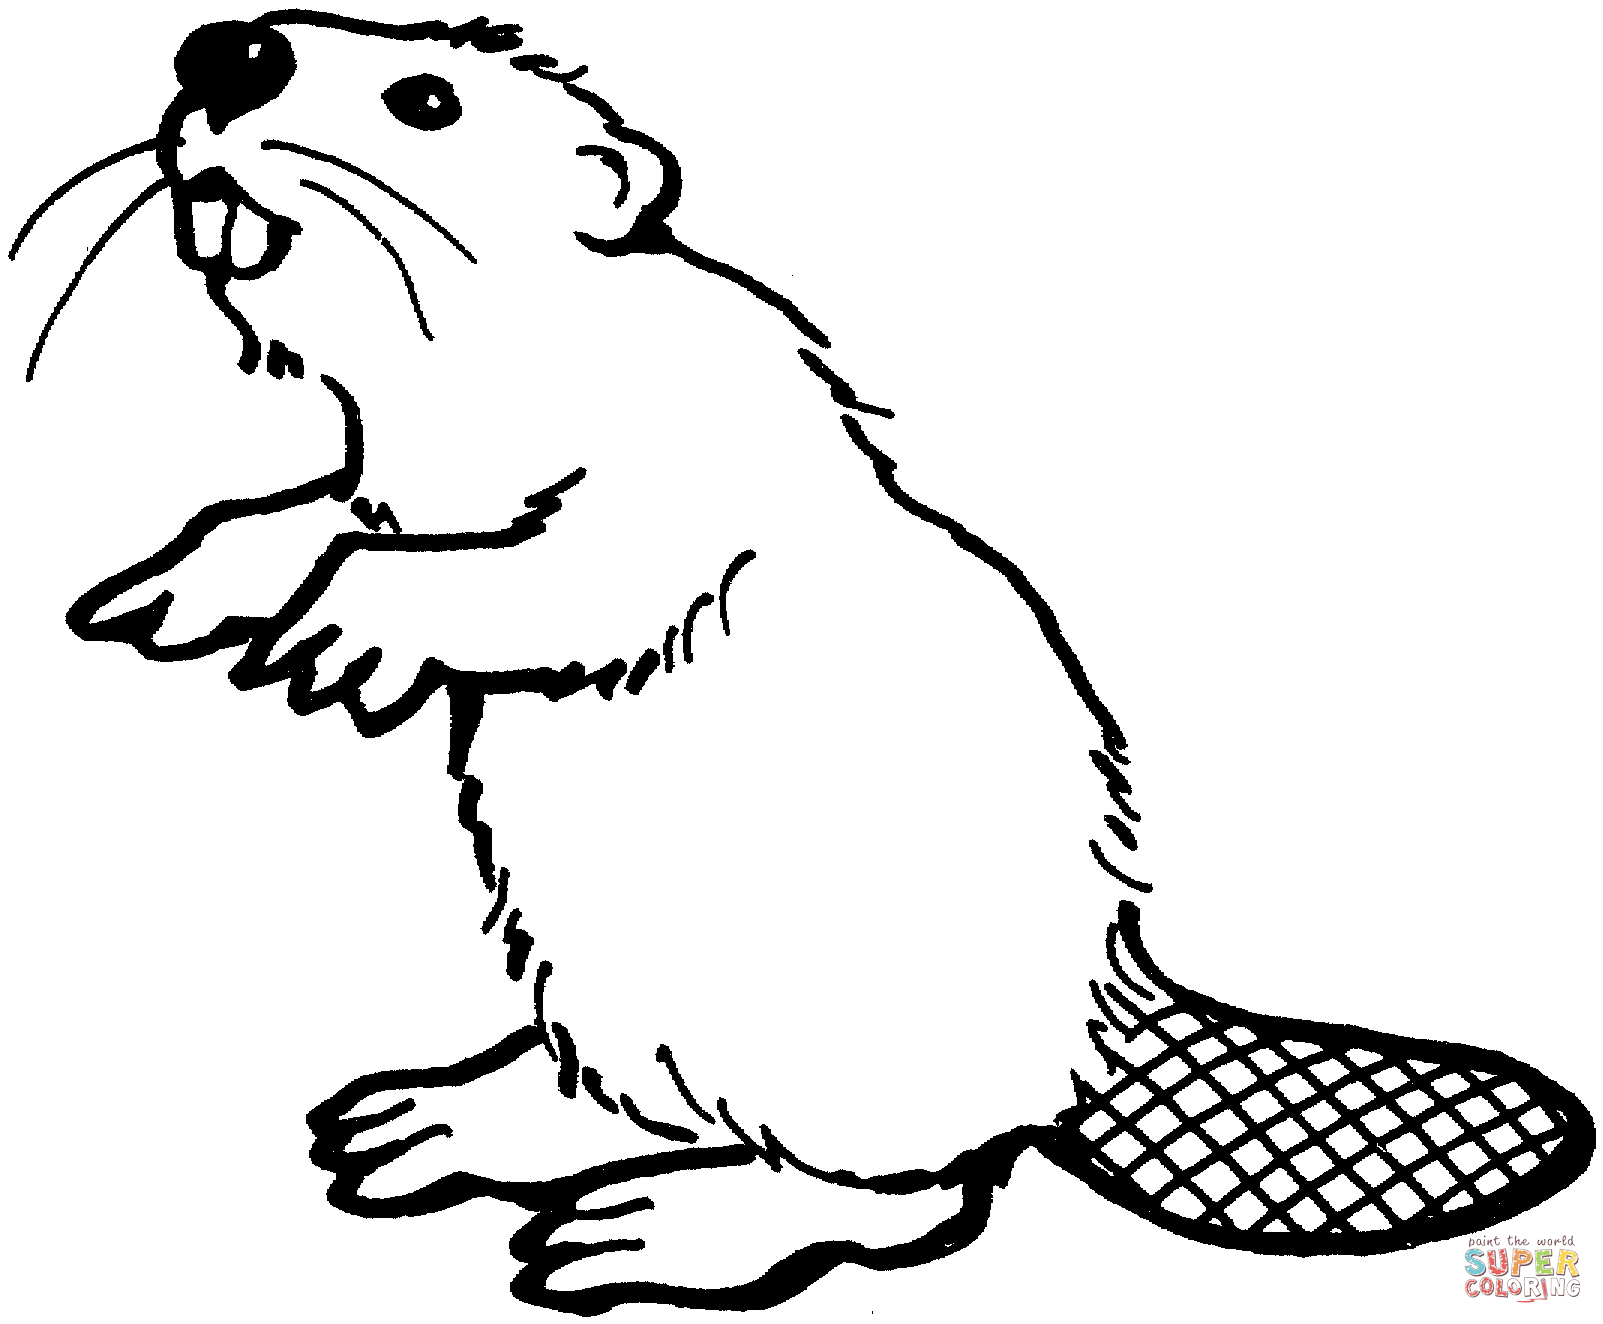 American coloring free printable. Beaver clipart colouring page